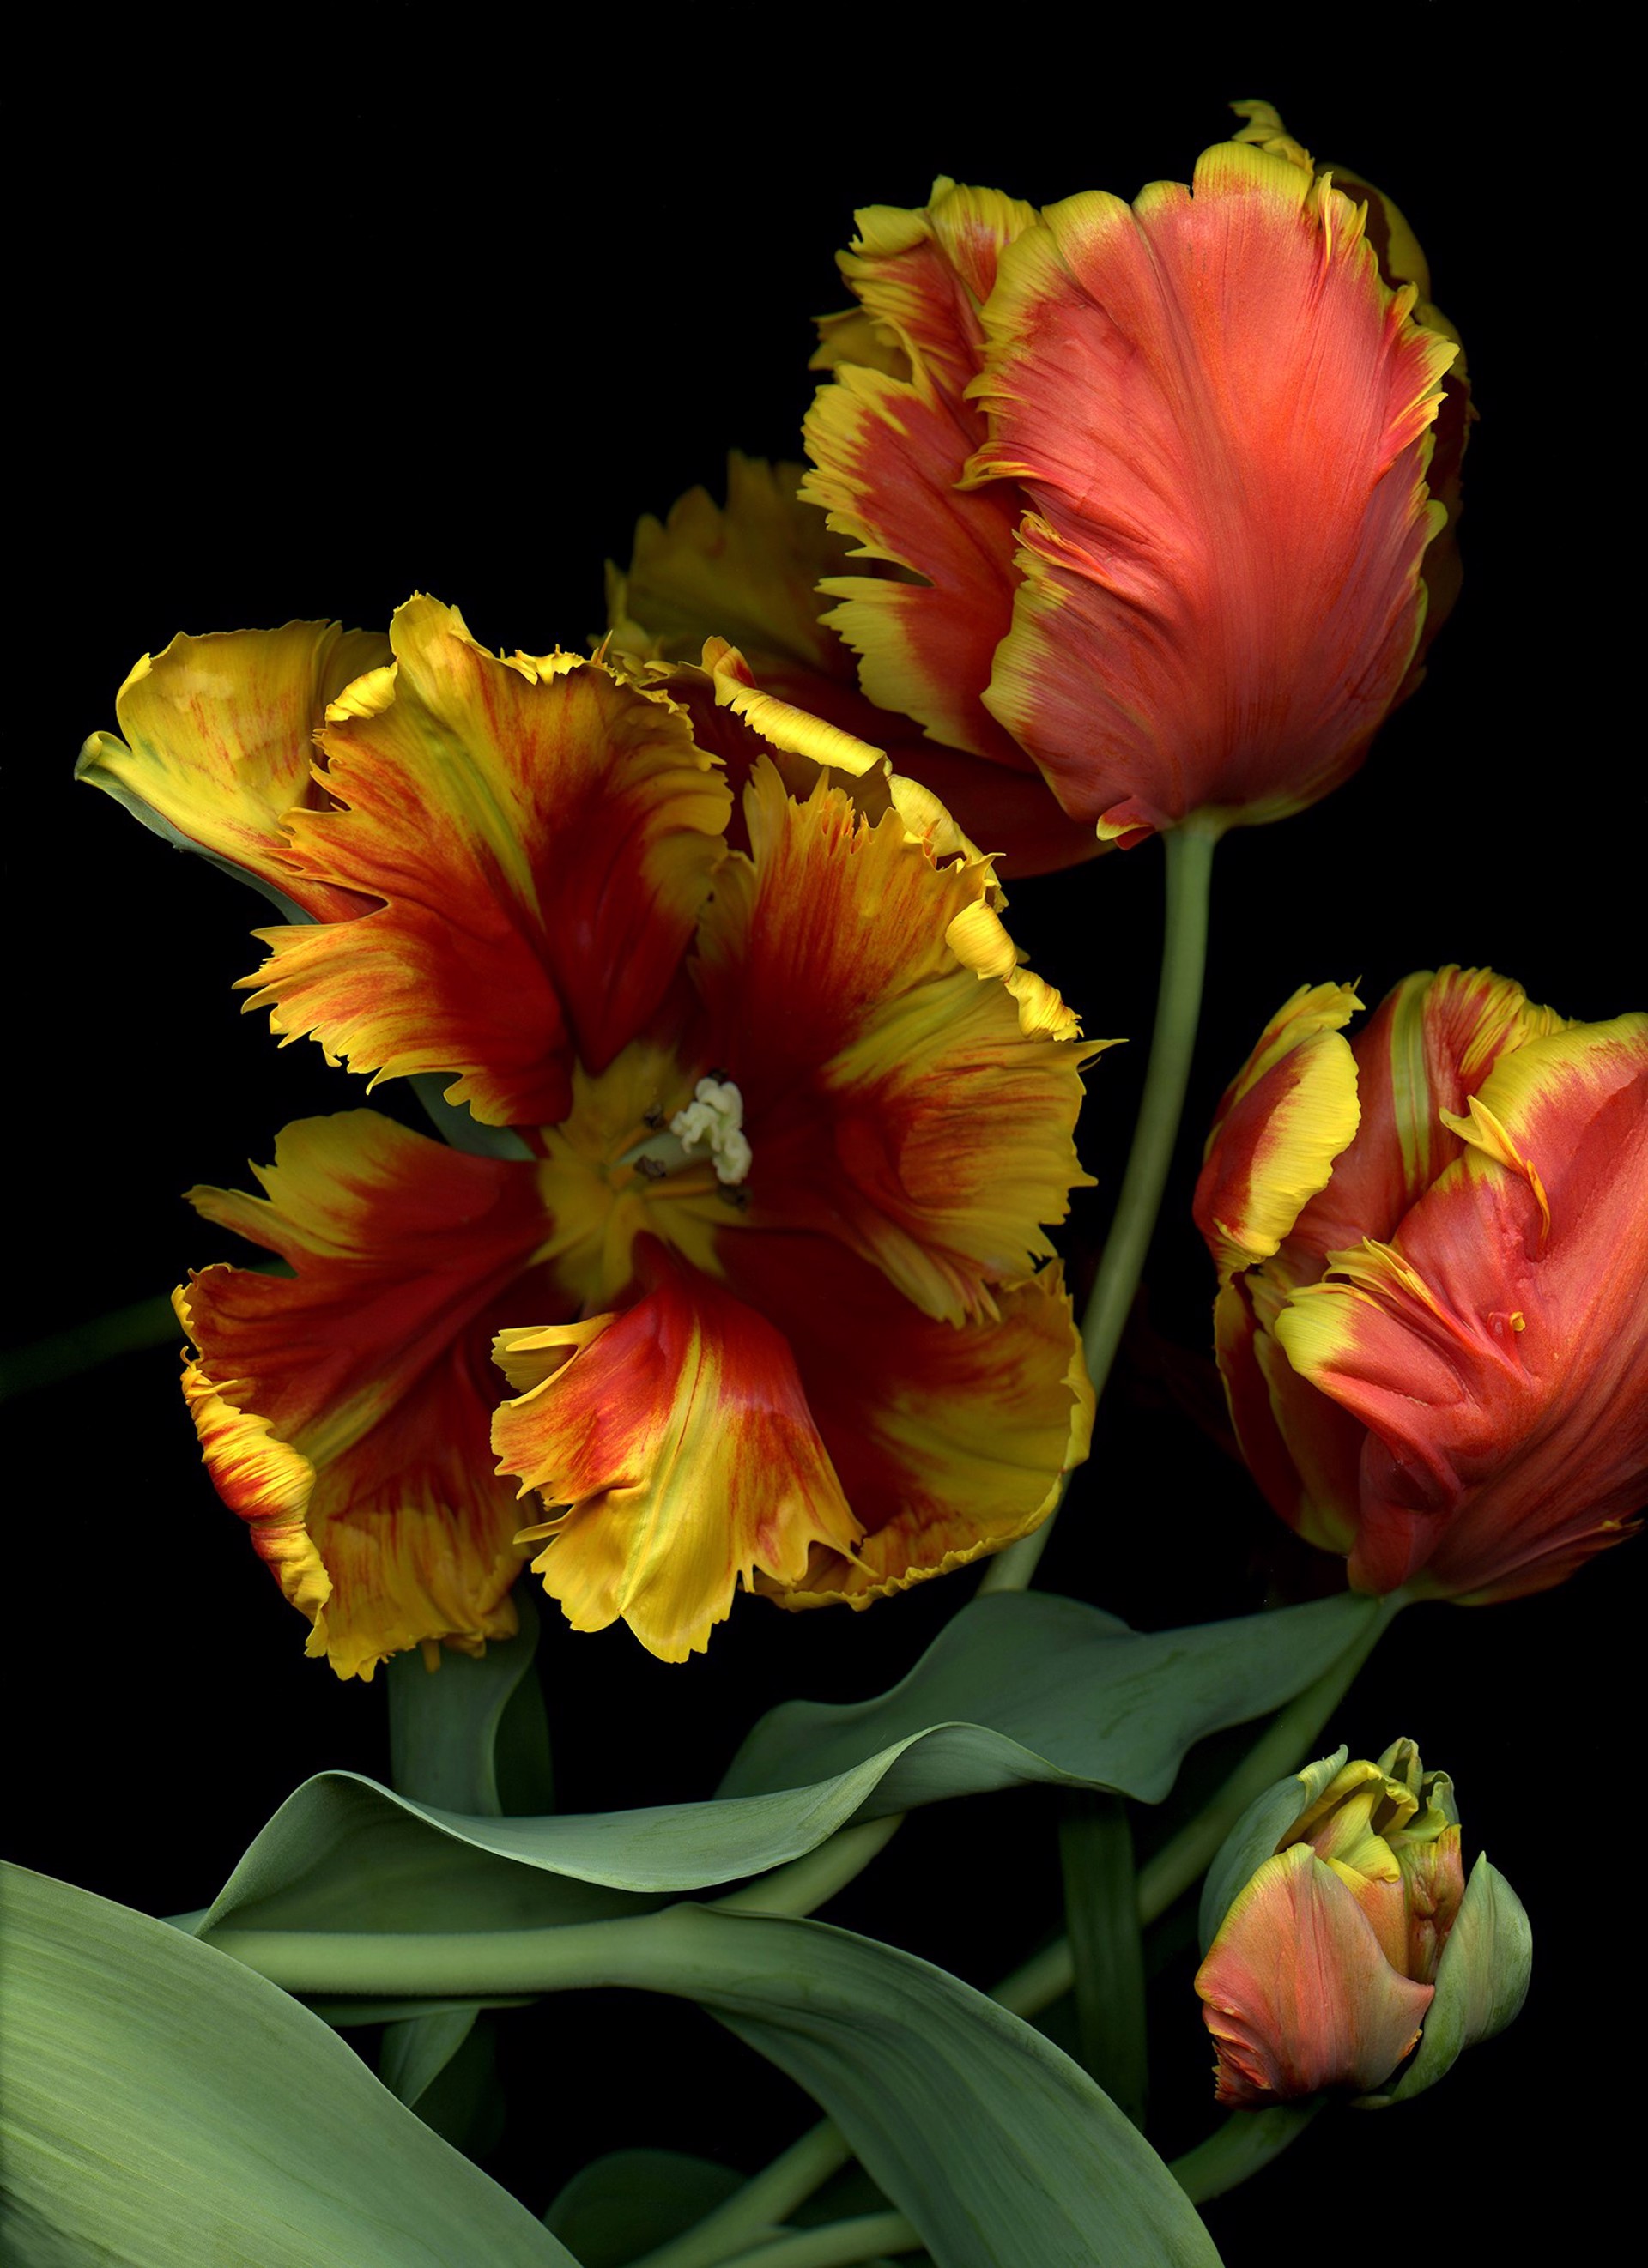 Parrot Tulips by Laurie Tennent